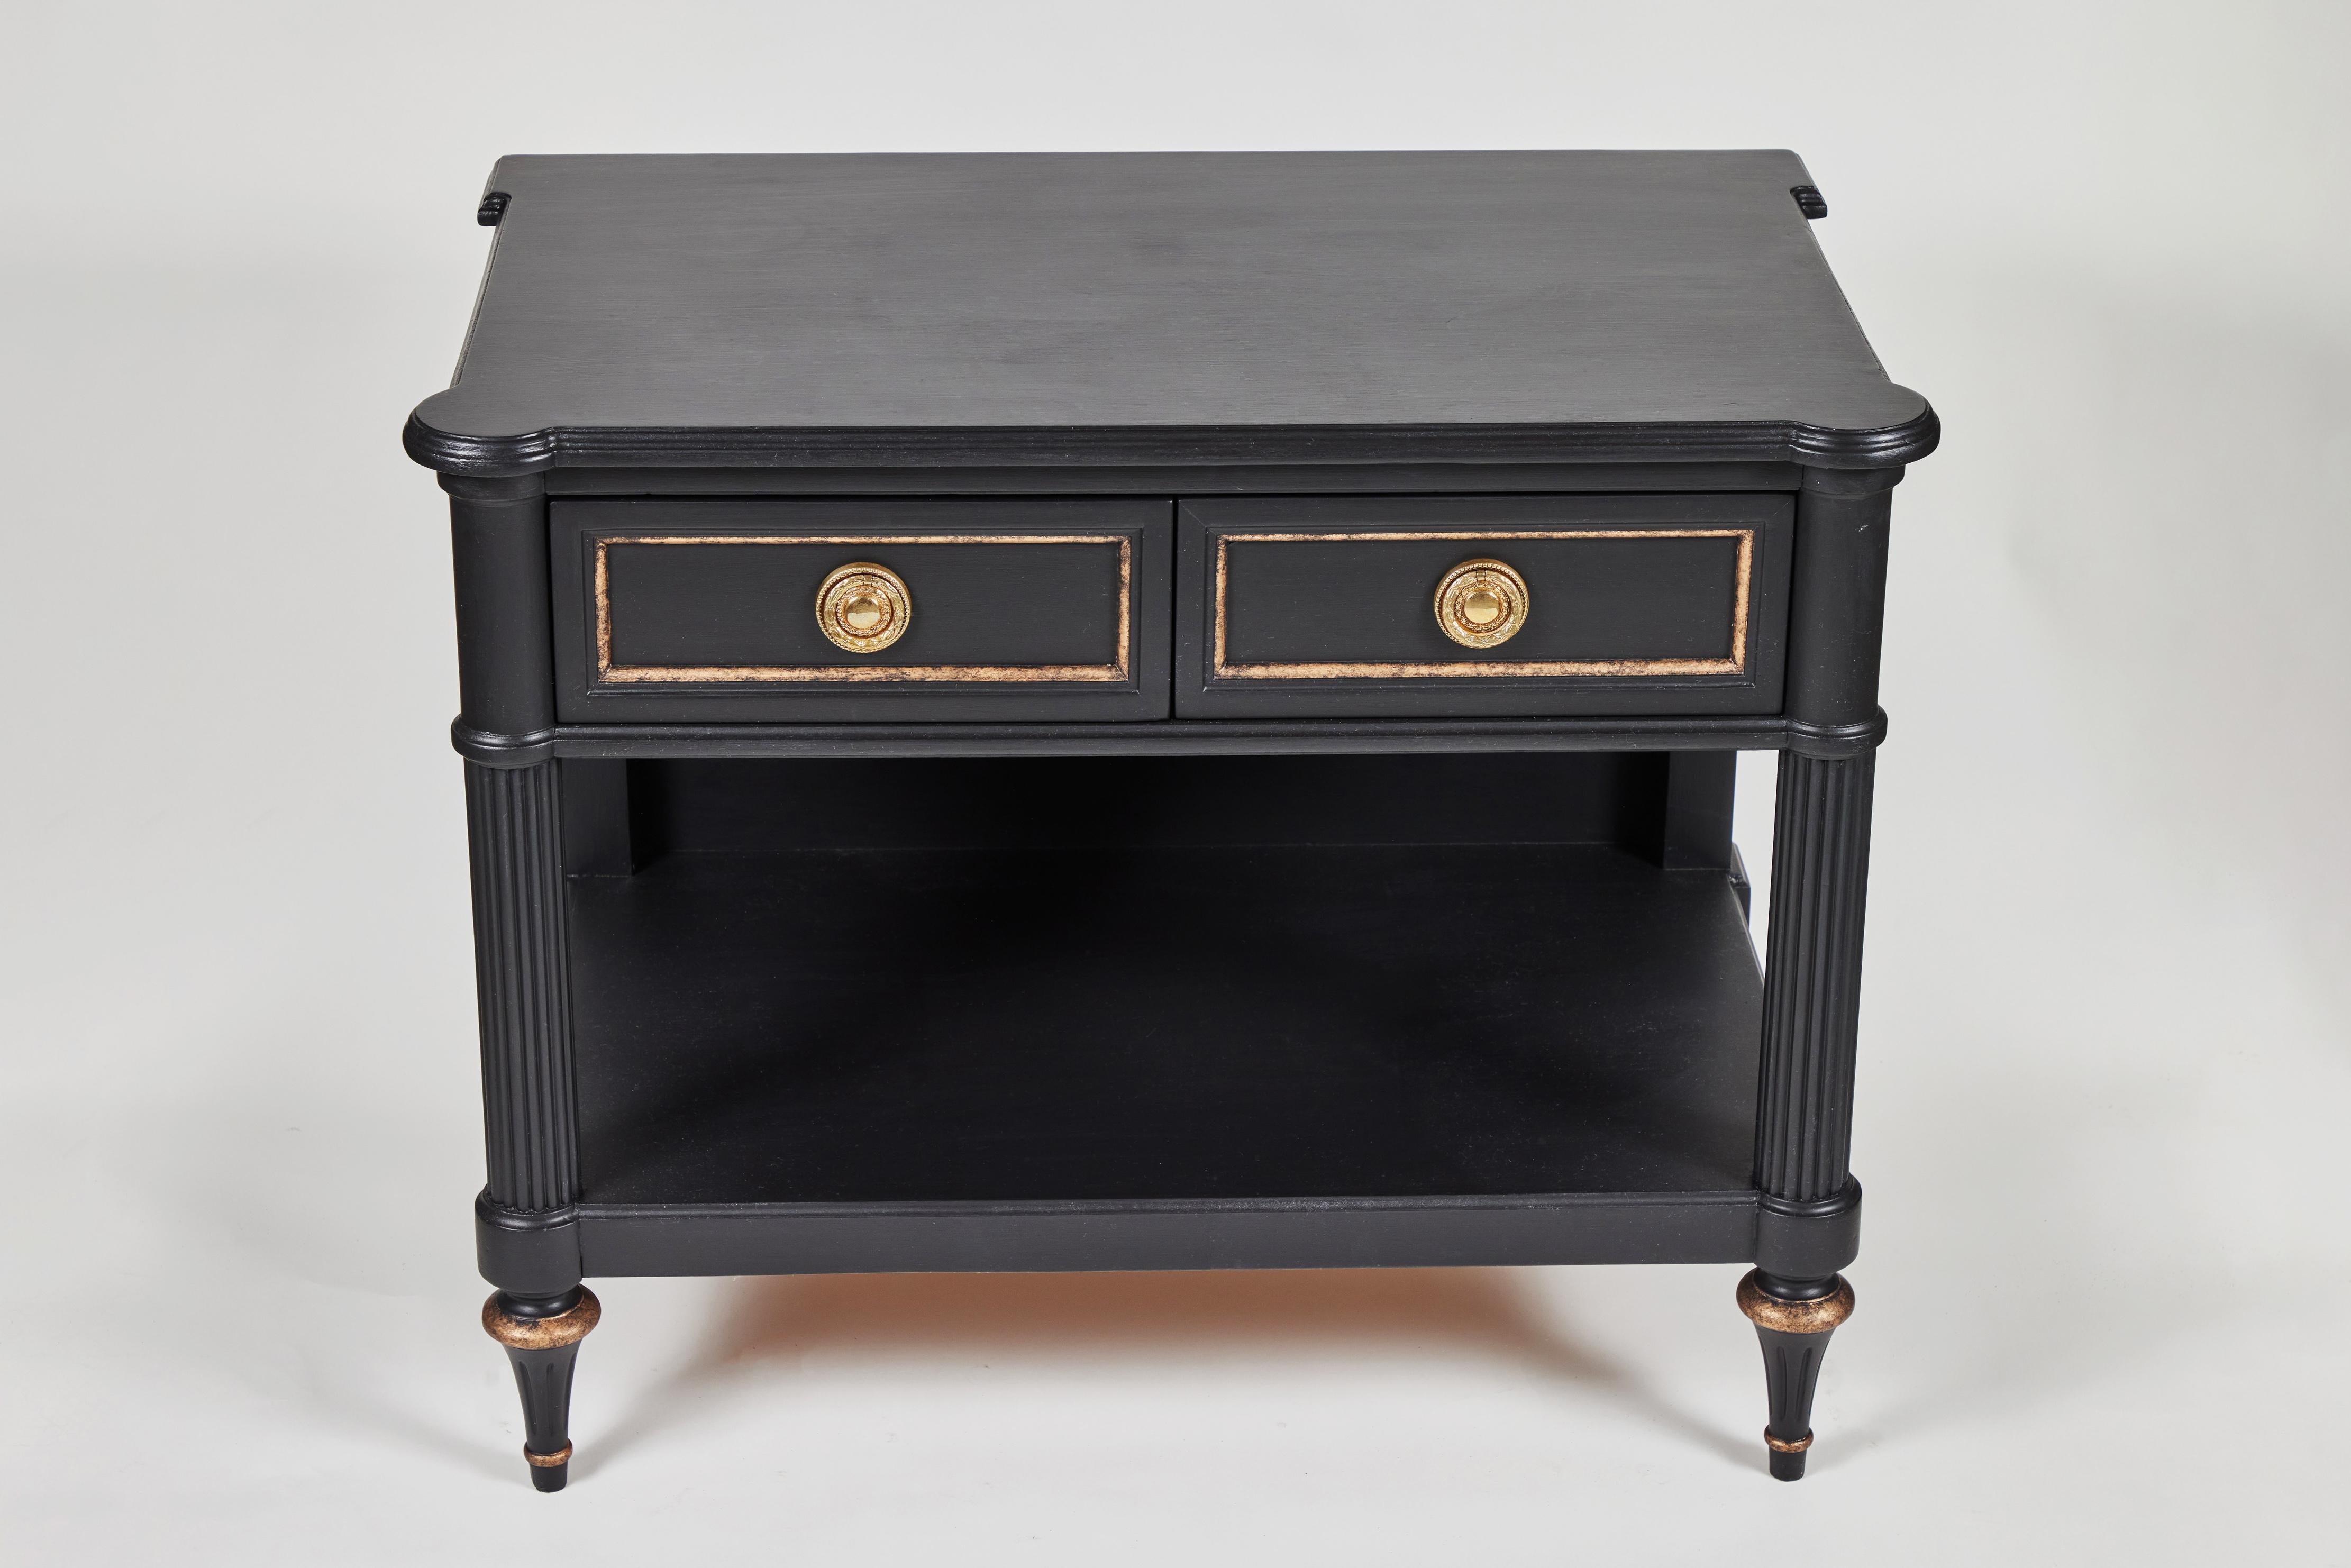 20th Century Vintage 2-Drawer Side Table Newly Painted in Black w/ Distressed Gold Details